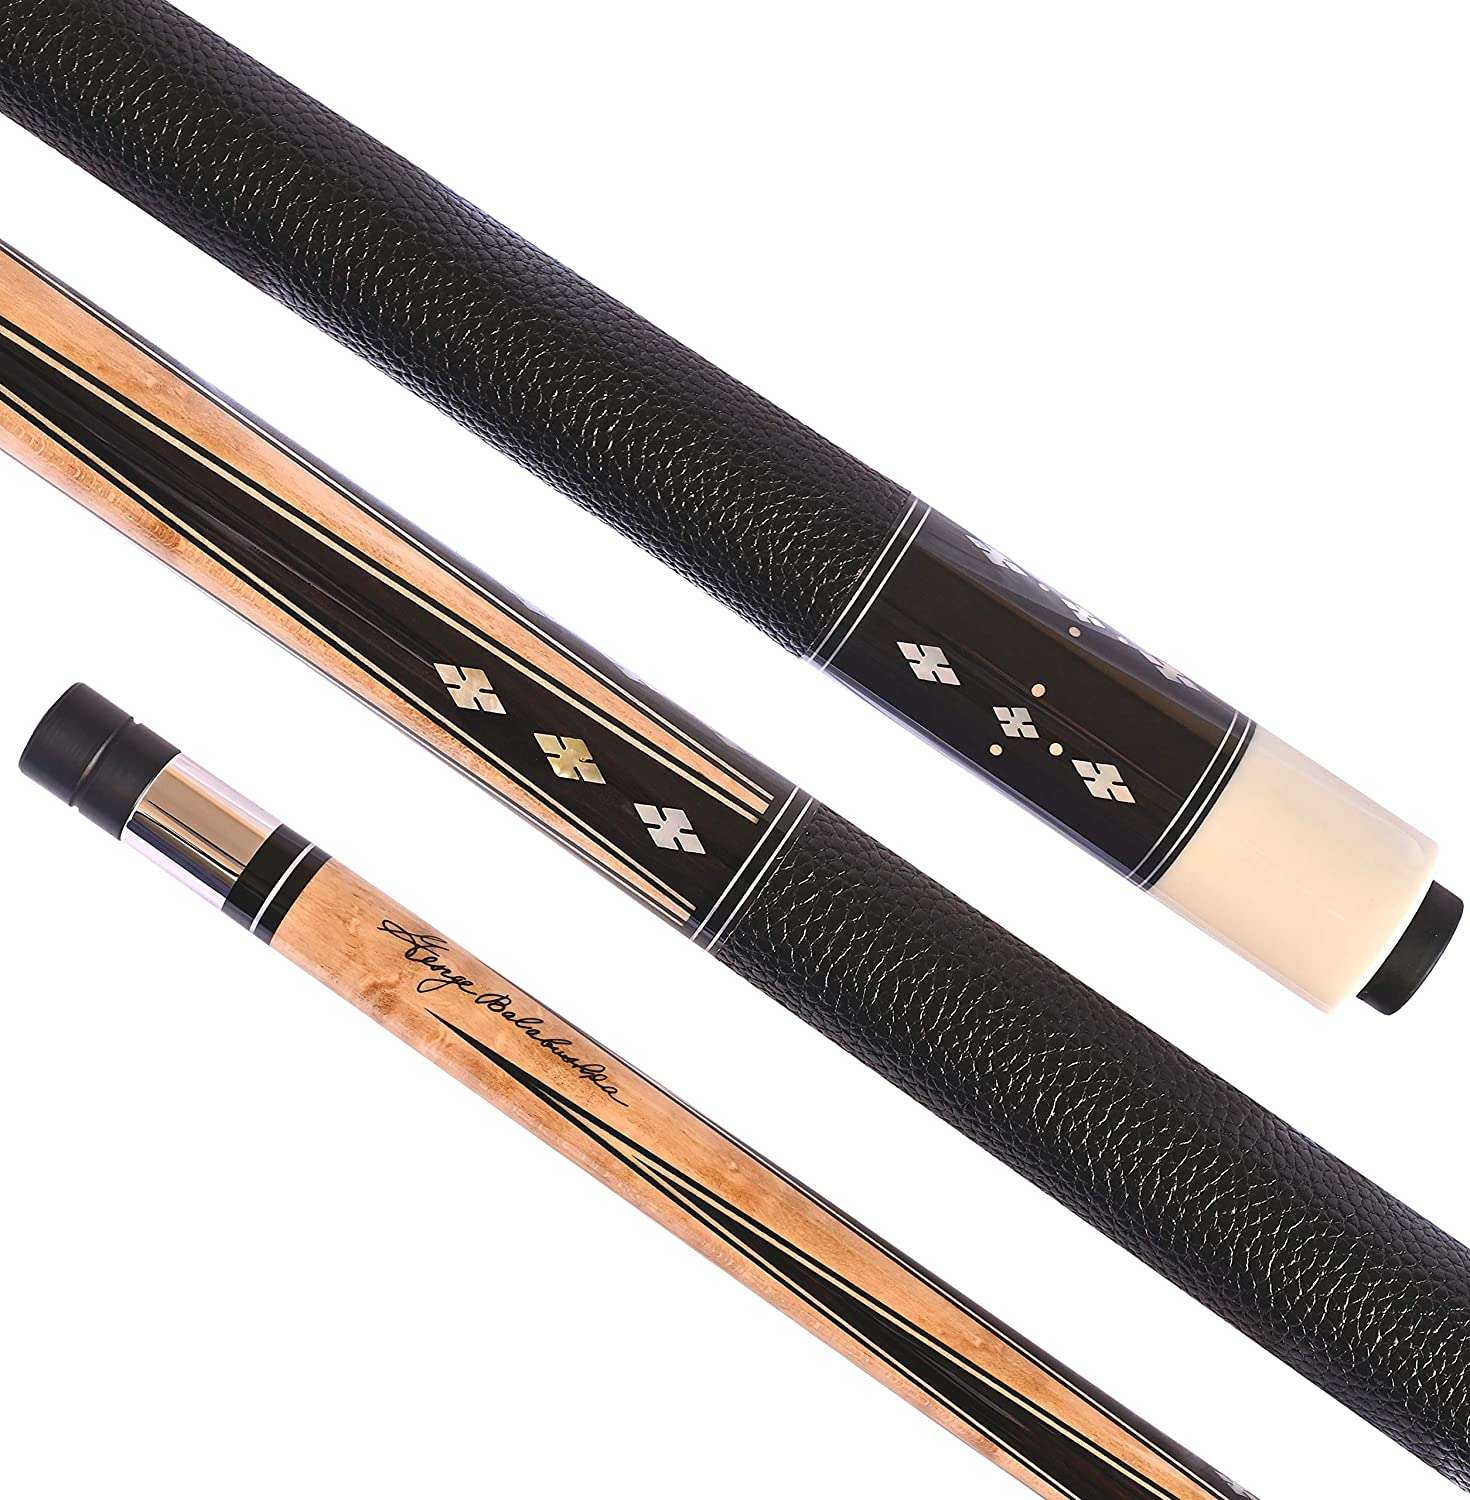 Buying Guide: The Best Pool Cue Brands To Order Online in ...